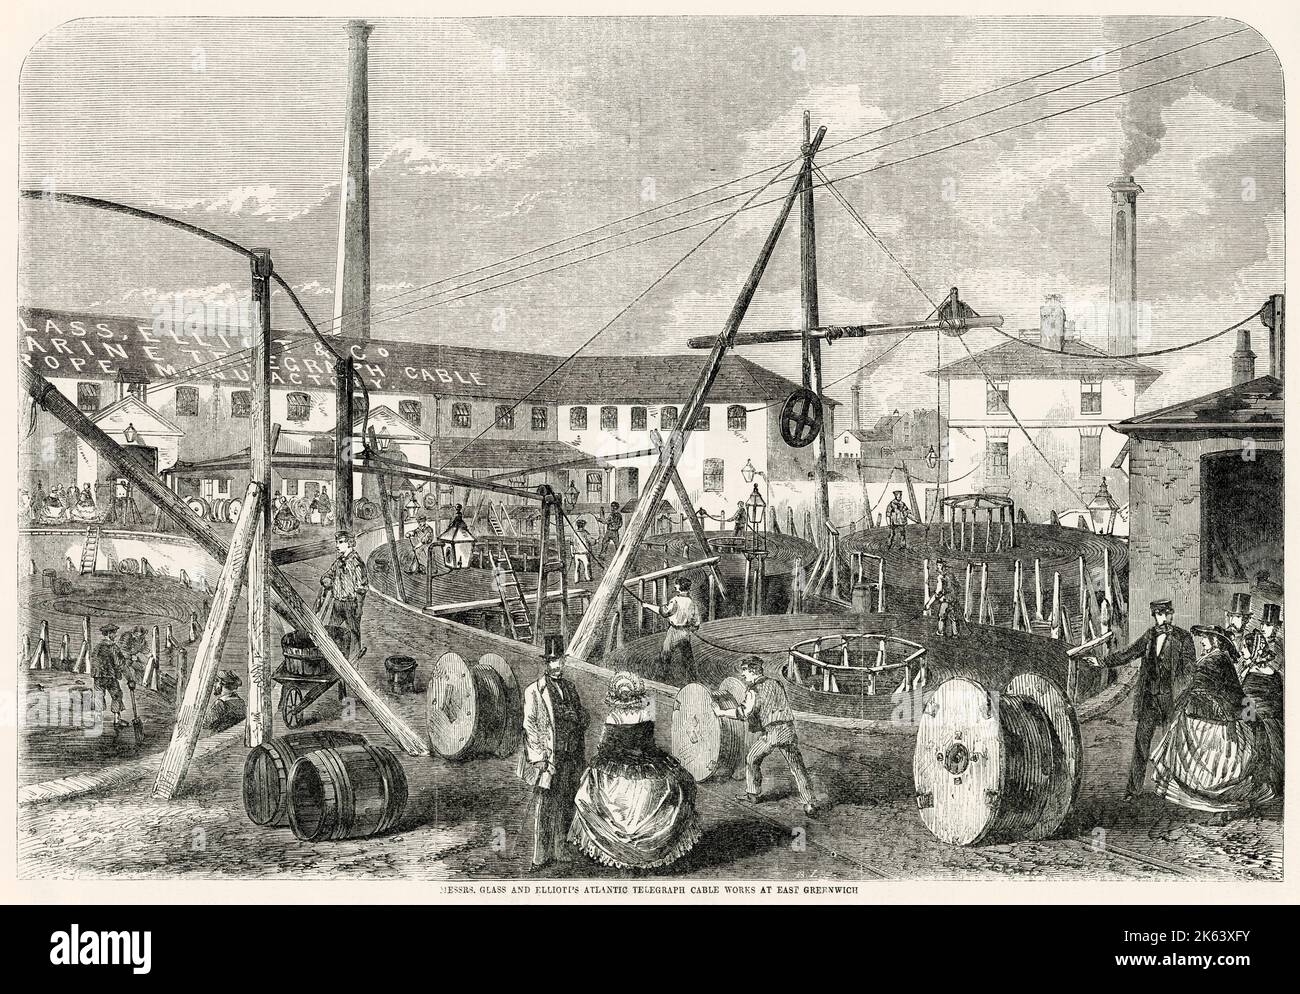 Messrs Glasse and Elliott's Atlantic Telegraph Cable Works yard at East Greenwich, London. The 1,250 tons of telegraphic cable being laid out in five coils to go on-board the H.M.S. 'Agamemnon' ship. Stock Photo